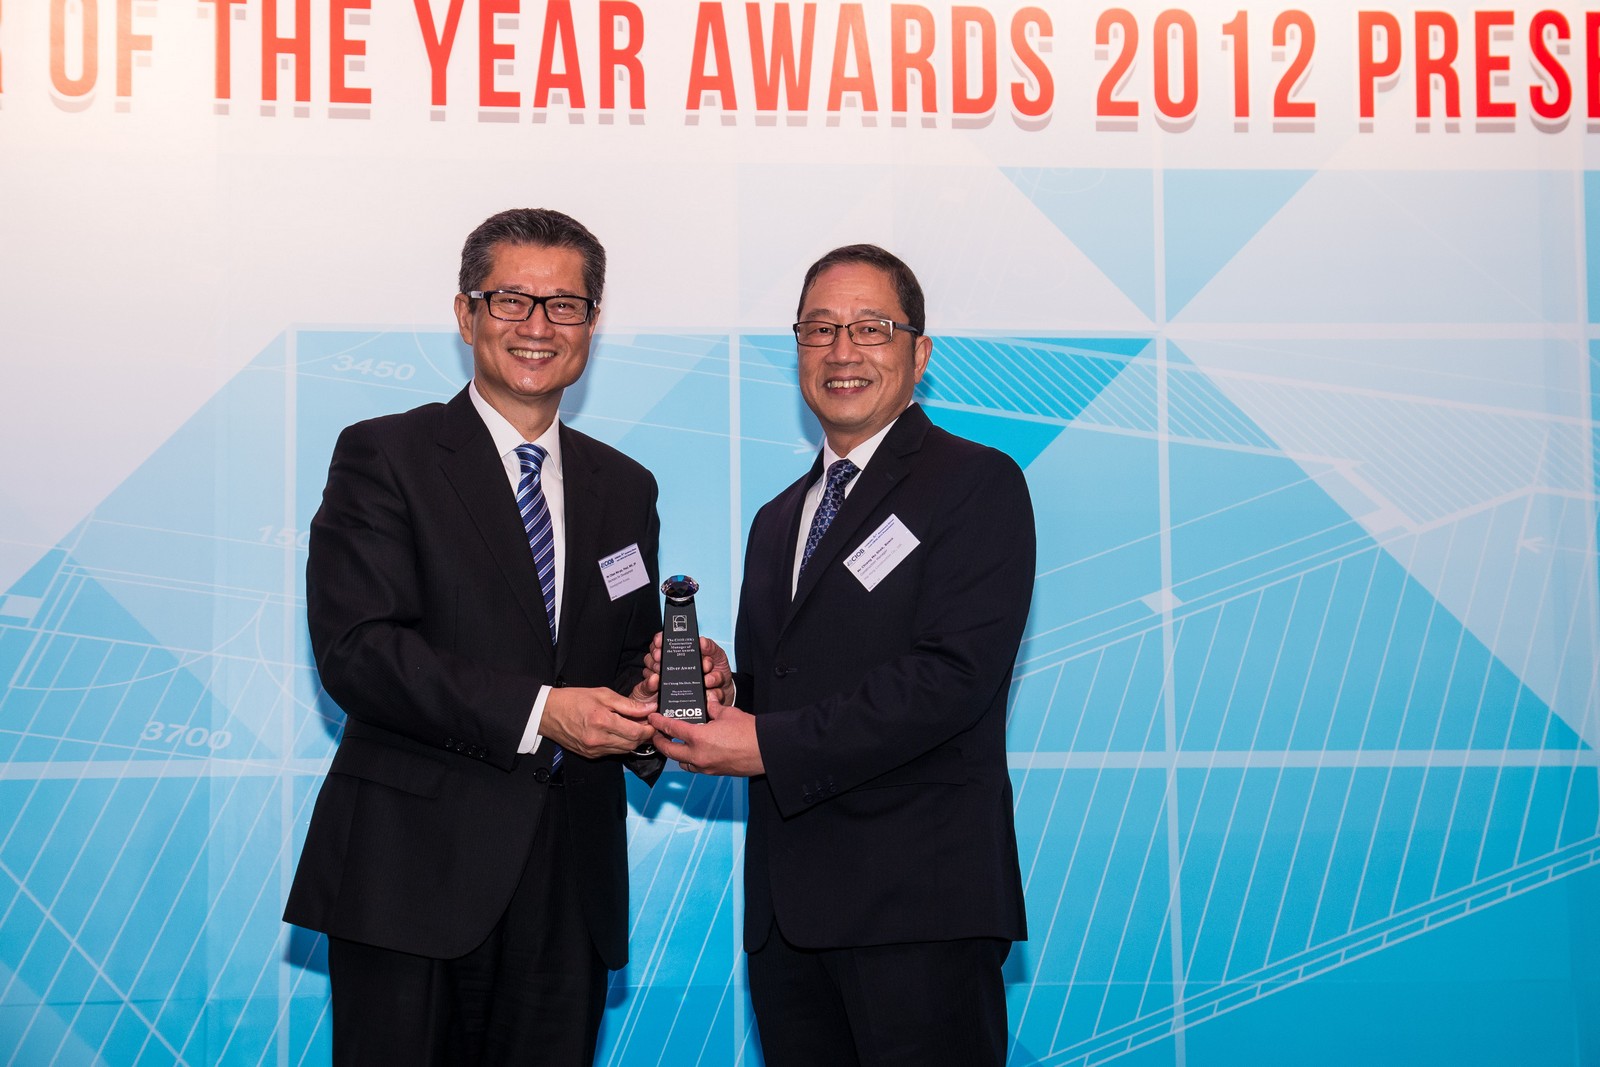 Bosco Chiang's (right) dedicated effort to complete a quality job that exceeded the expectations of the Client was a key driver of the success of the project